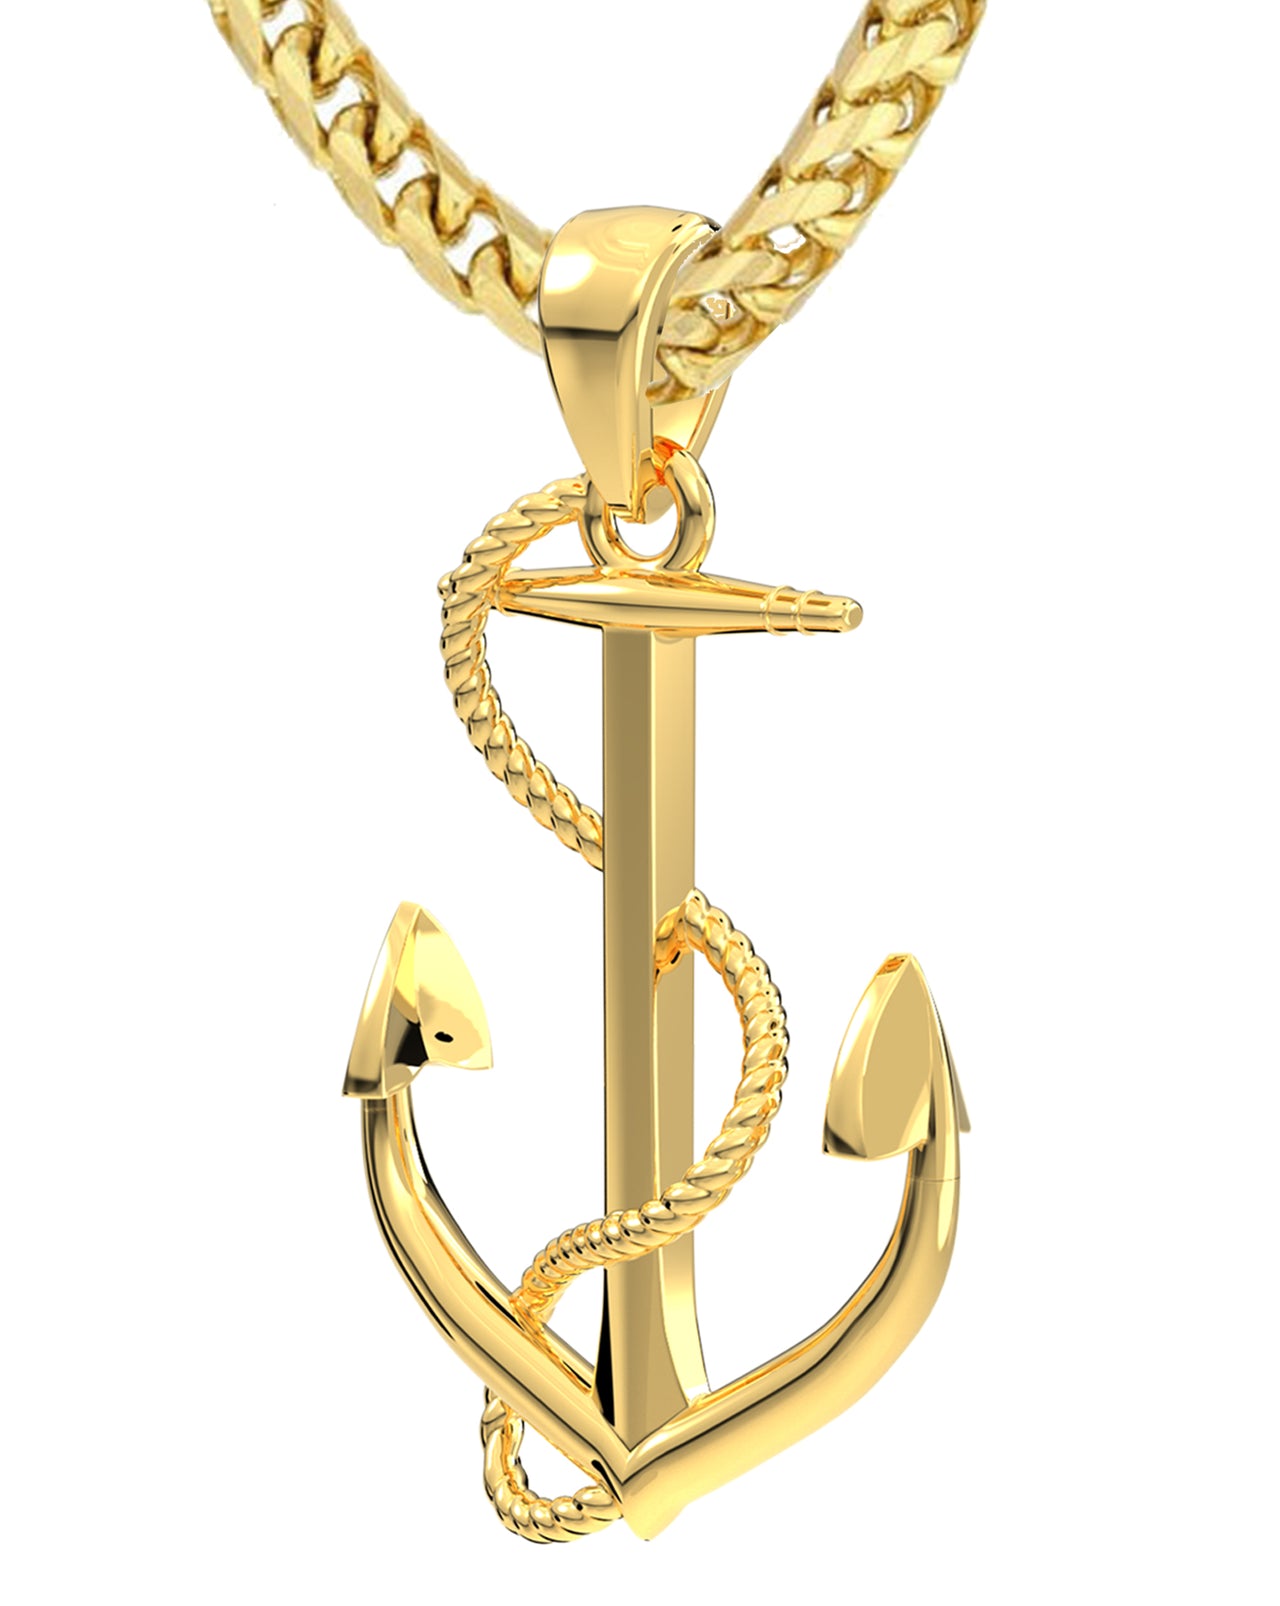 Men's XL Heavy Solid 2in 14K Yellow Gold Nautical Maritime Anchor Pendant Necklace, 50mm